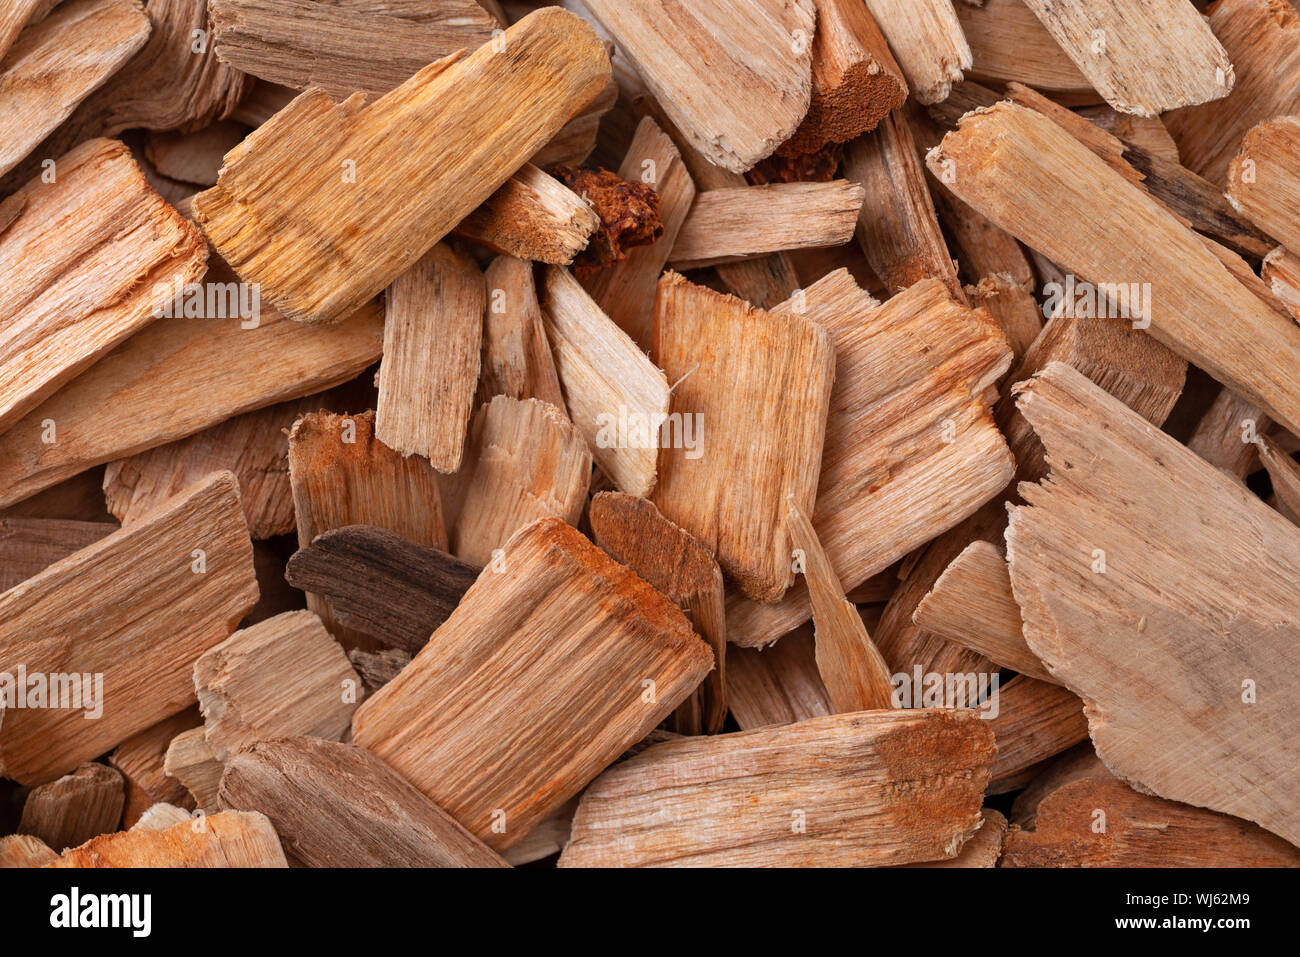 Close view of a group of alder smoking chips illuminated with natural lighting. Stock Photo